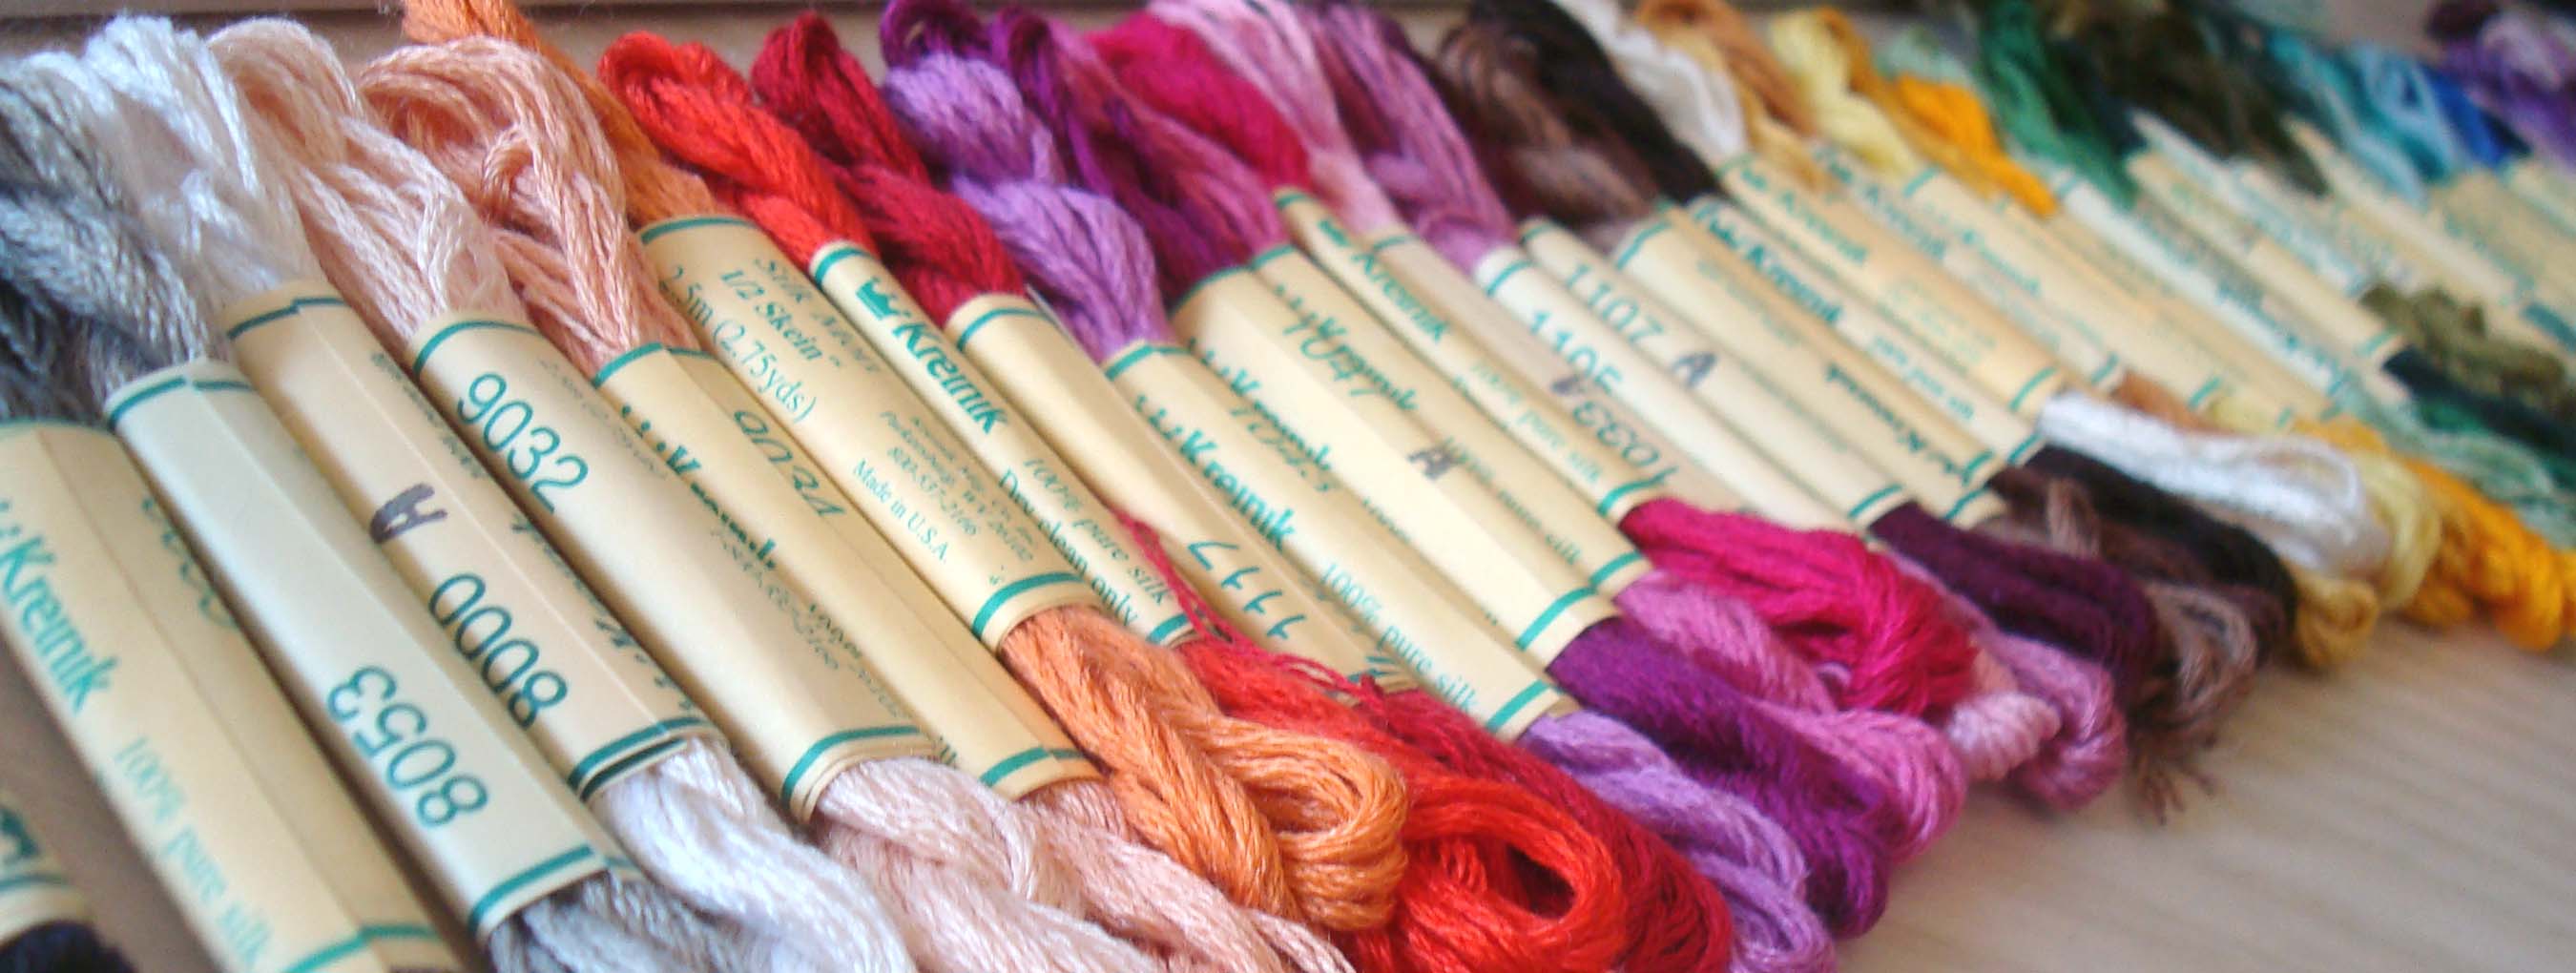 Notice the "A" on some of the labels of these Kreinik Silk Mori skeins? That indicates a new dye lot. Check labels on all of your threads to see if there is a dye lot designation.